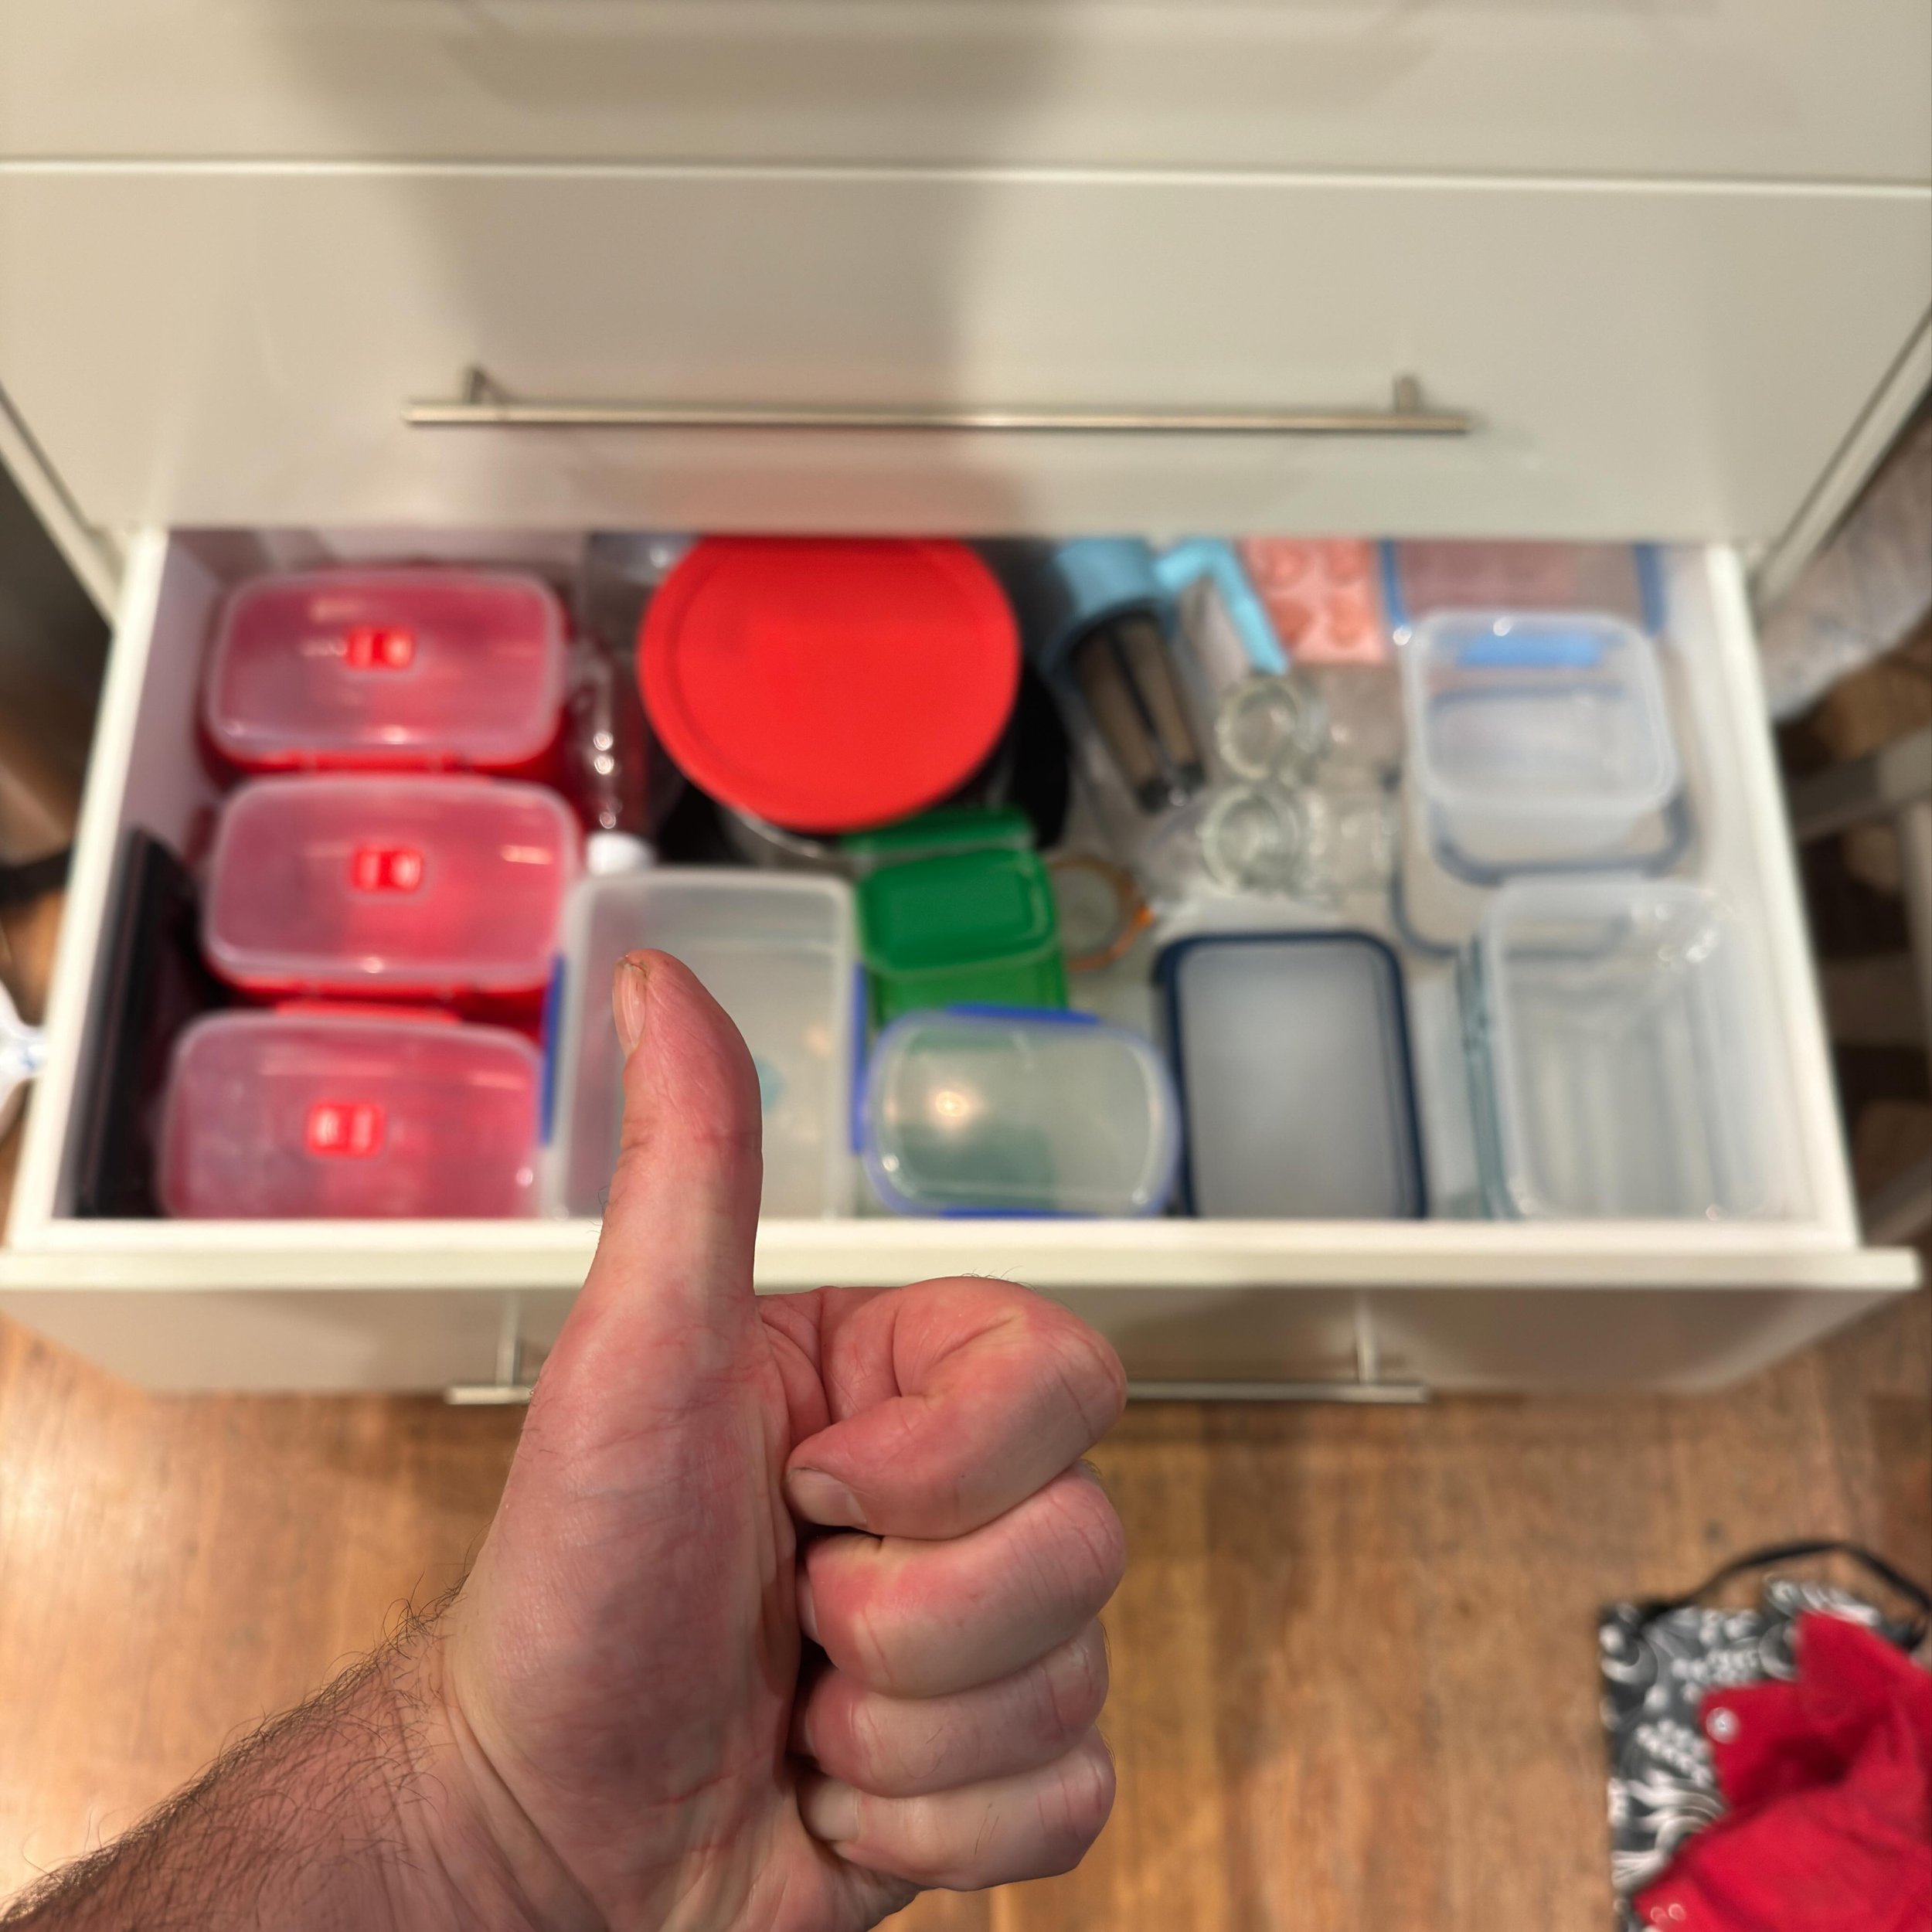 SATURDAY NIGHT TUPPERWARE PARTY! This is for those that prioritise systems and organization. Over the years @ravensnest.space has become more and more organised, but occasionally I just have to get down on my knees and sort out the f*!king cupboards!